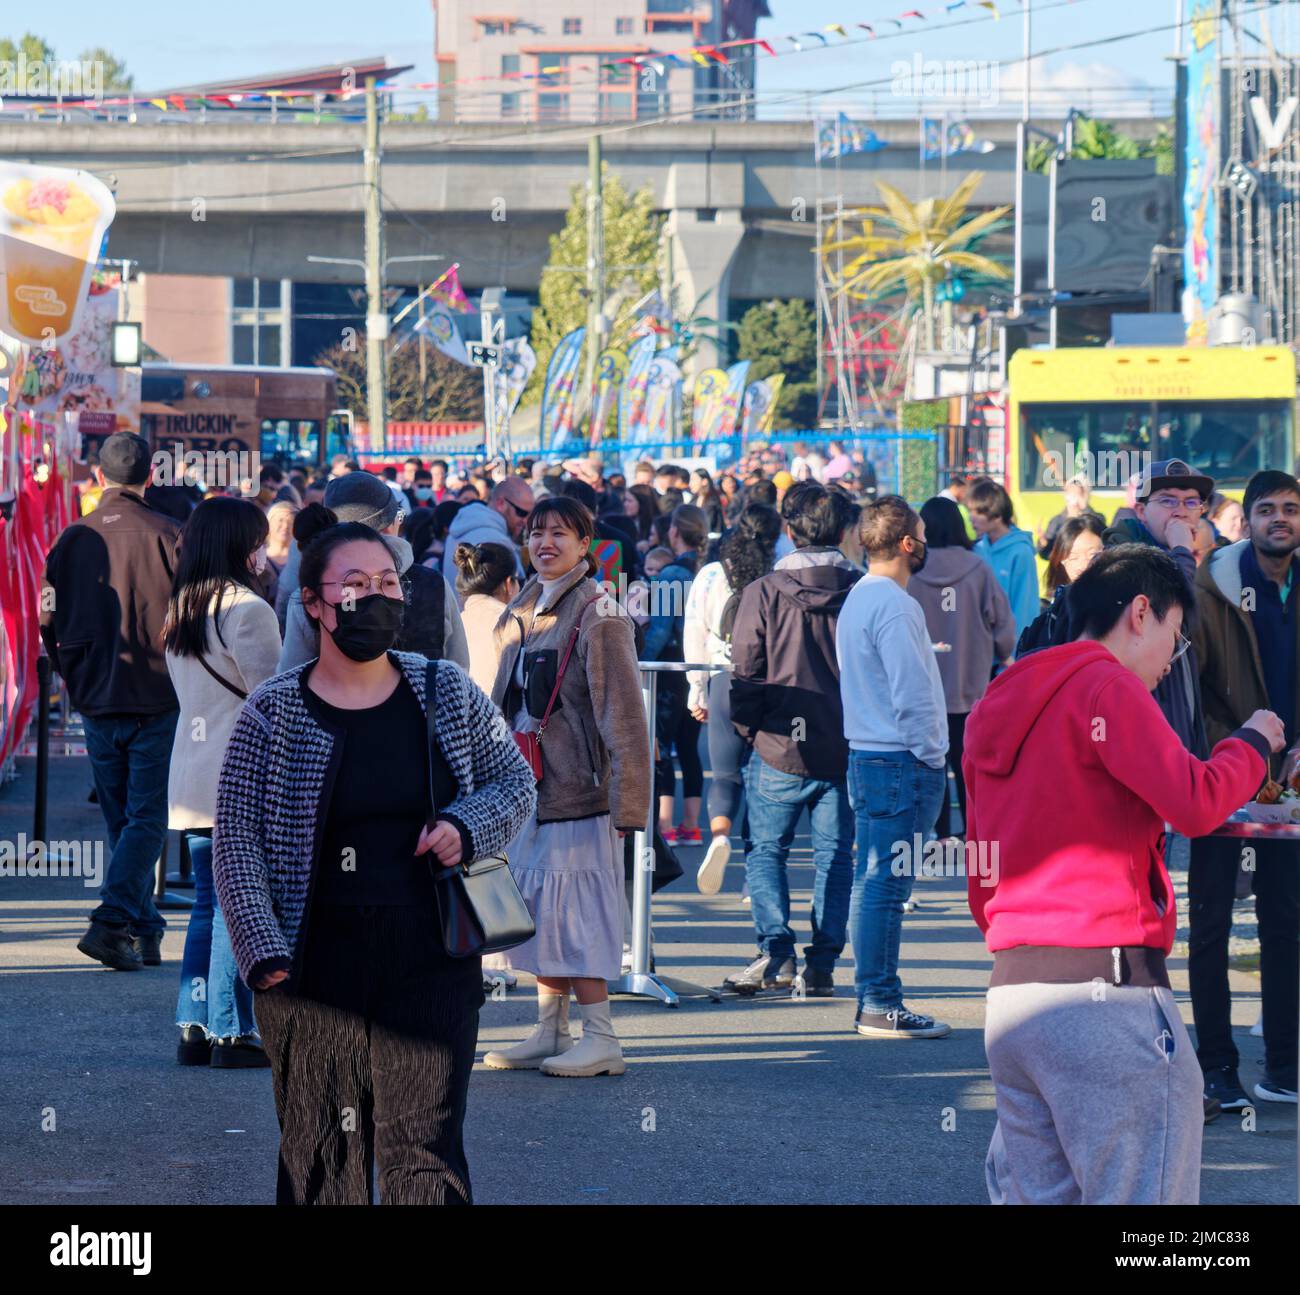 RICHMOND, BRITISH COLUMBIA - April 30, 2022 : Since 2000, the Richmond Night Market has grown into the largest Night Market in North America, attracti Stock Photo